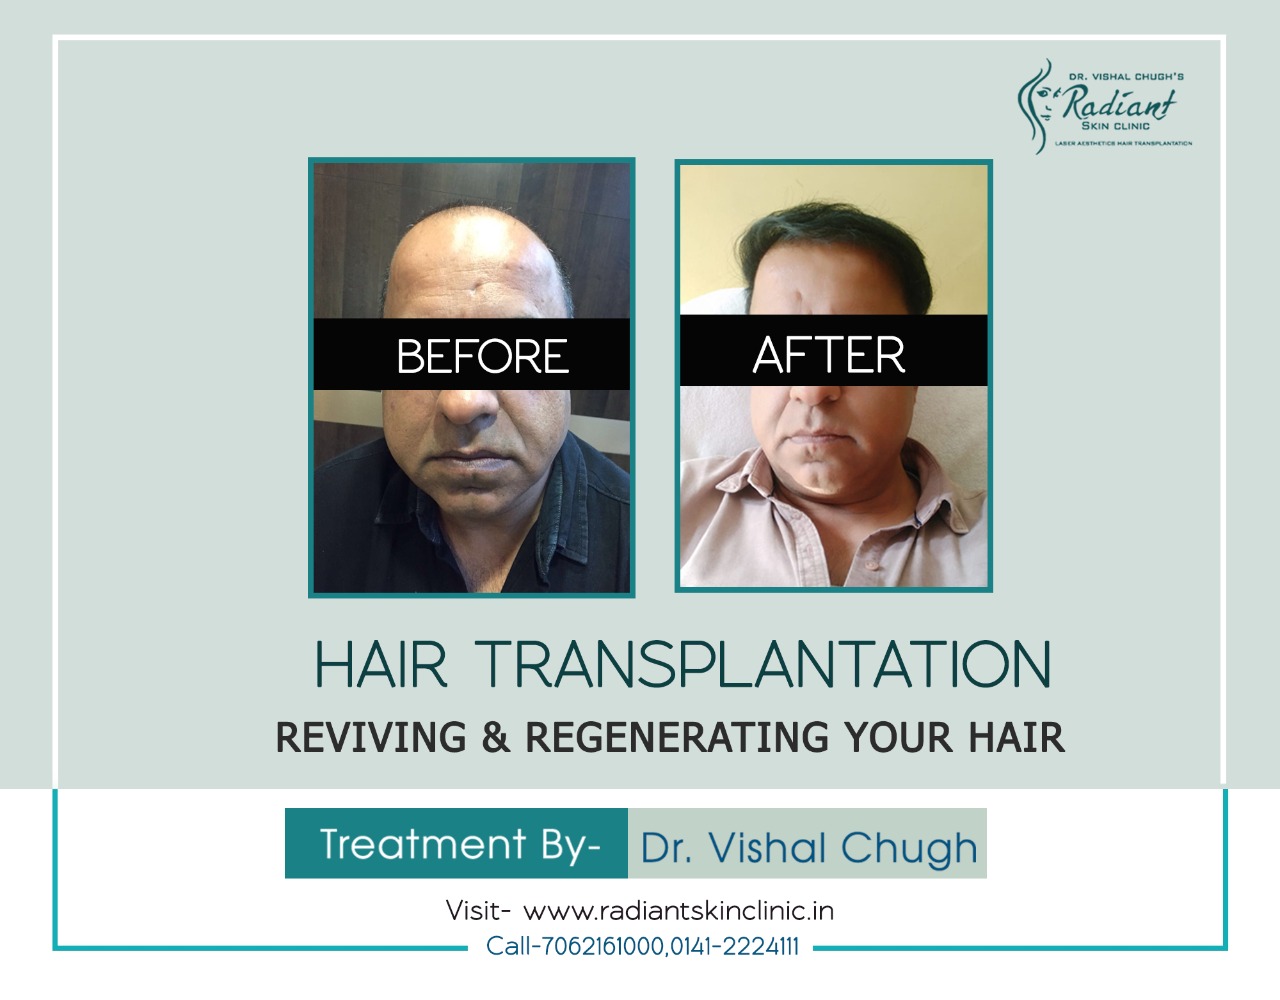 Revive and Regenerate your hair with hair transplantation  